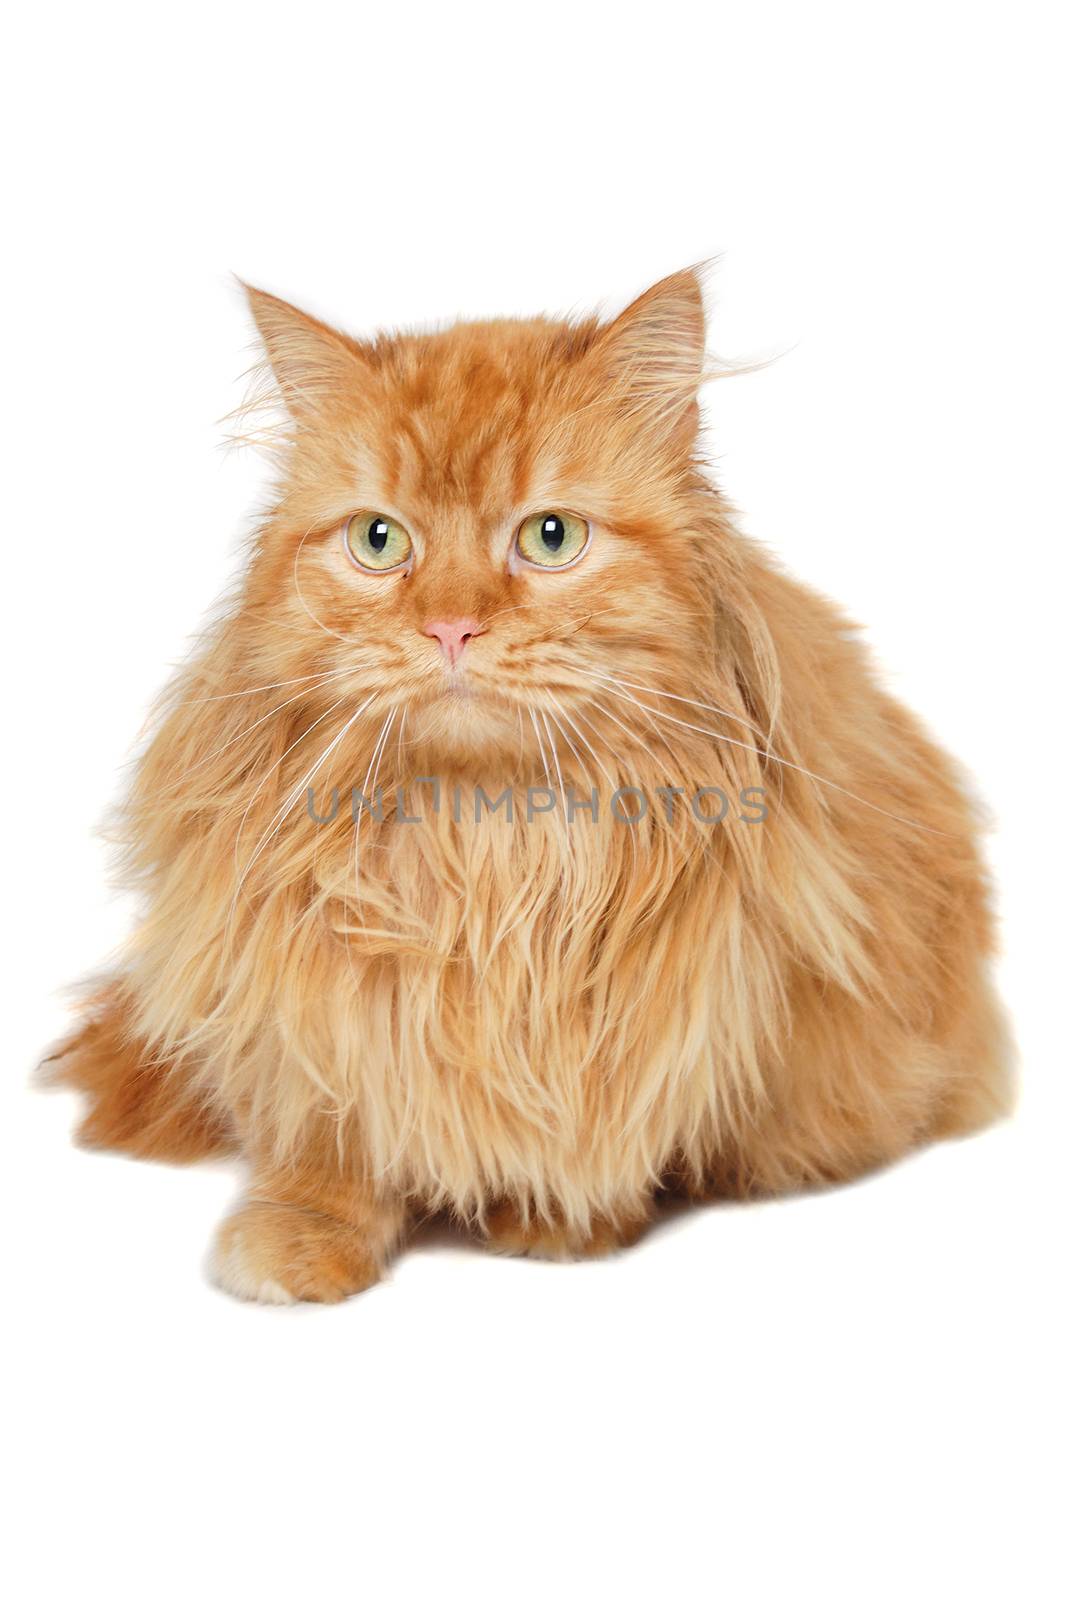 Red cat isolated on white background. by cfoto